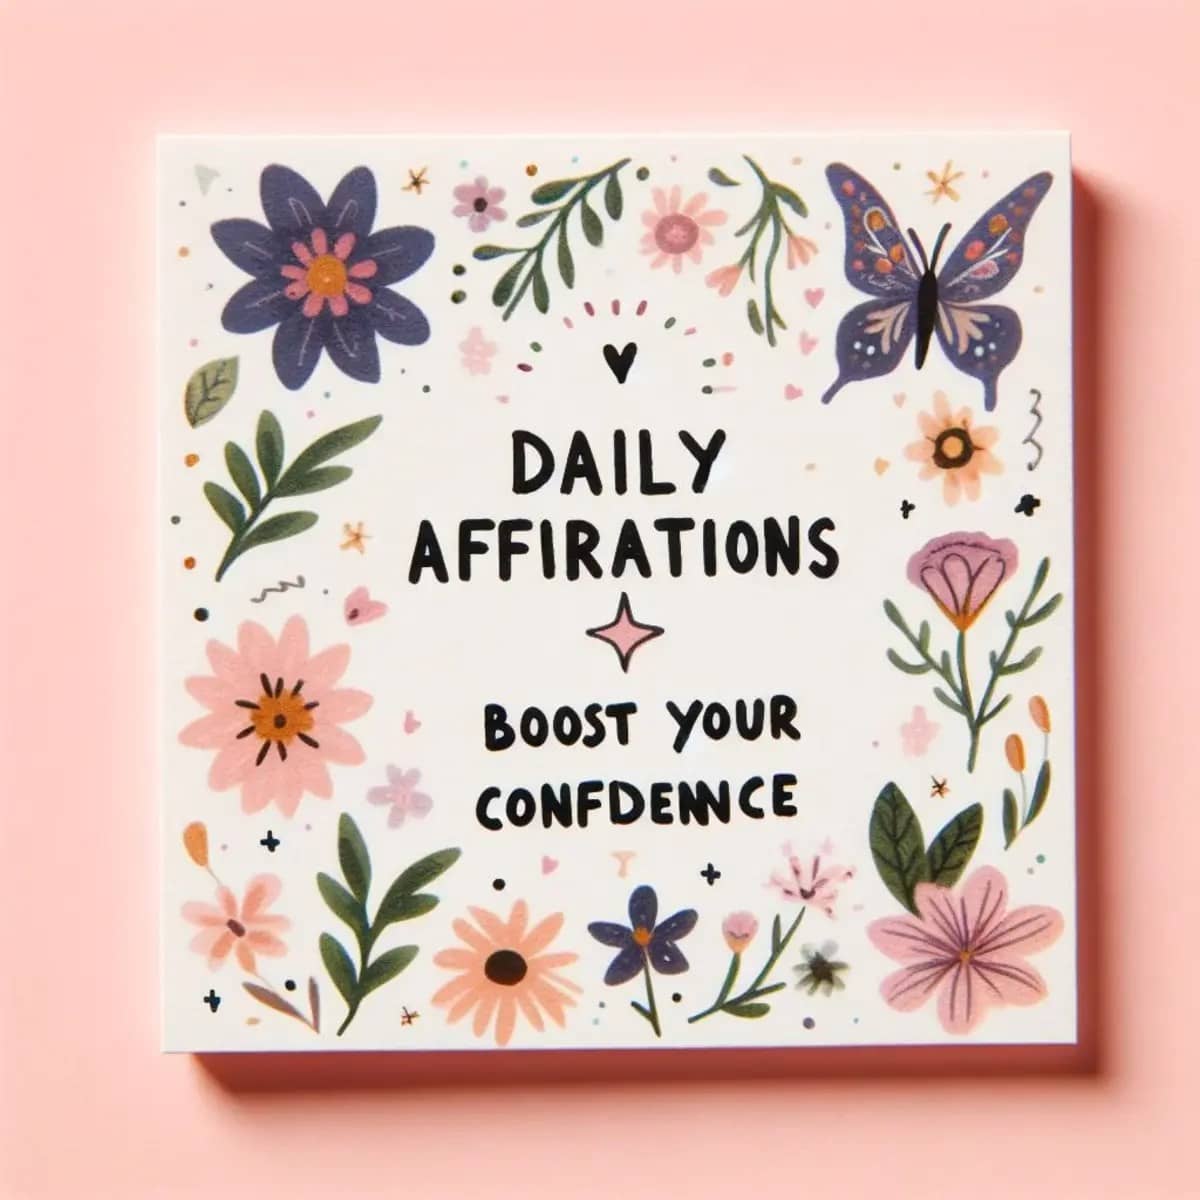 Daily Affirmations: Boost Your Confidence